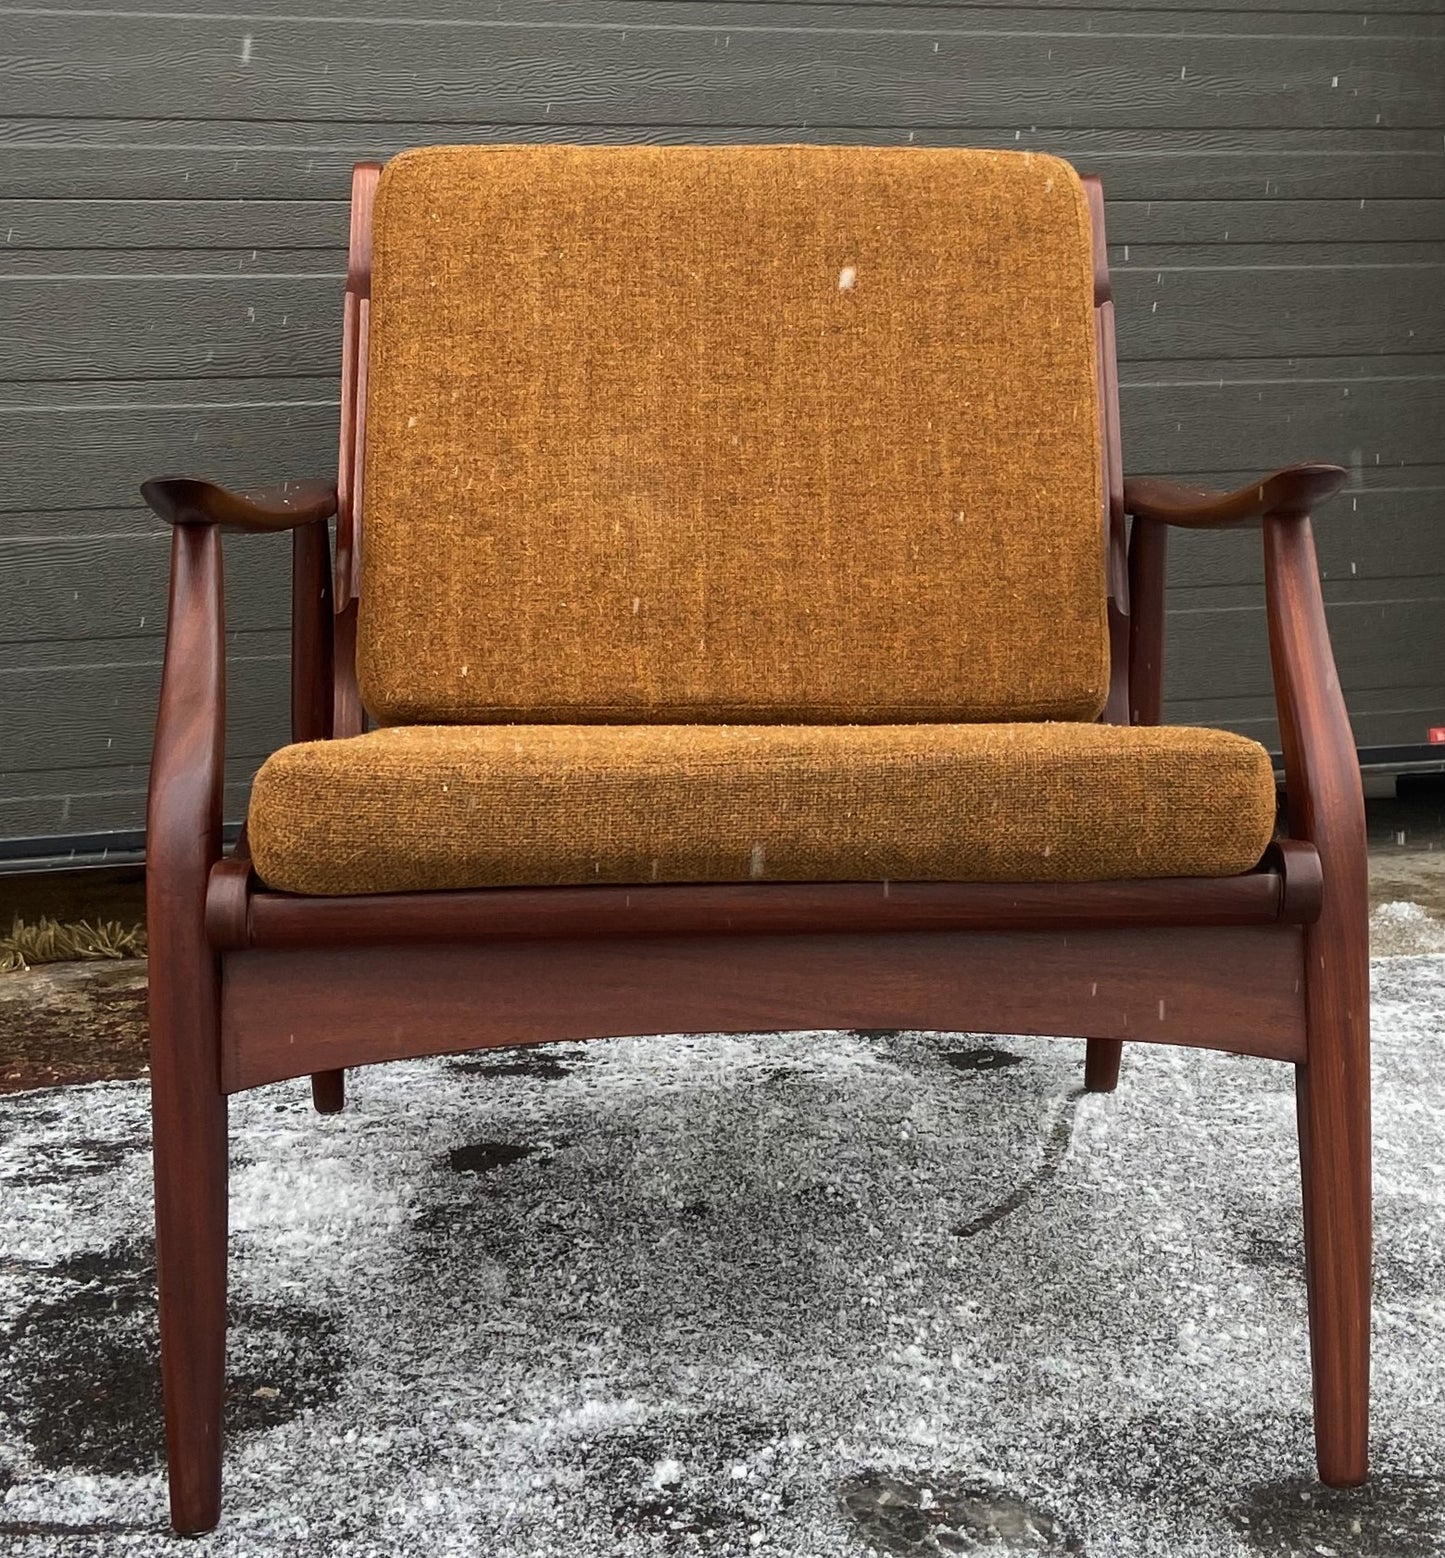 REFINISHED Mid Century Modern Solid Teak Lounge Chair with Cushions